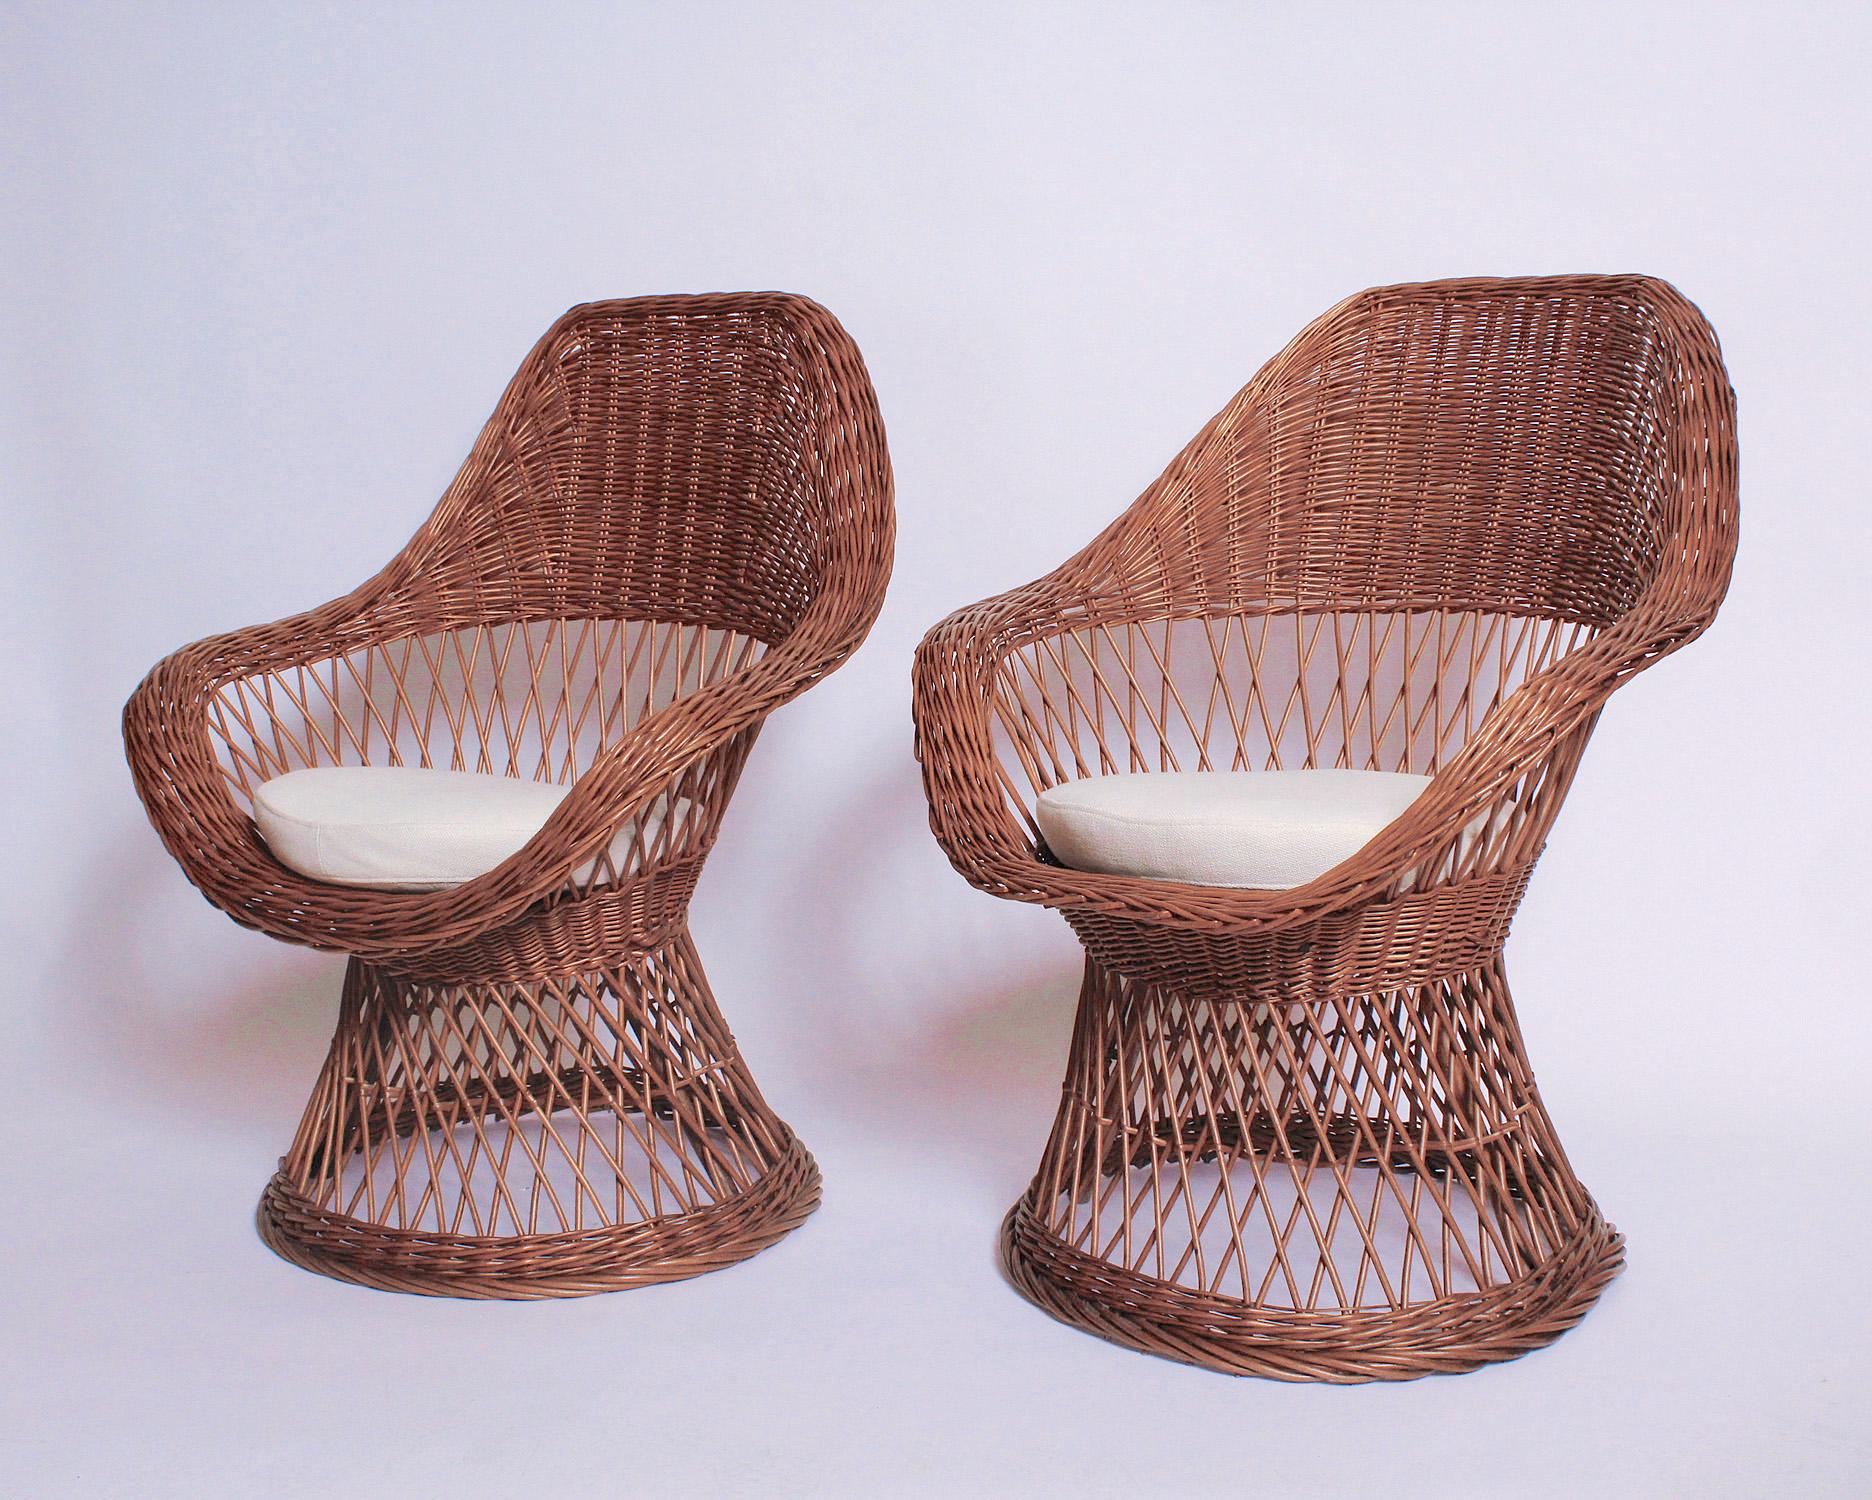 Lightweight pair of French Mid-Century Modern woven wicker lounge chairs with new cushions, upholstered in an off-white linen/cotton blend.